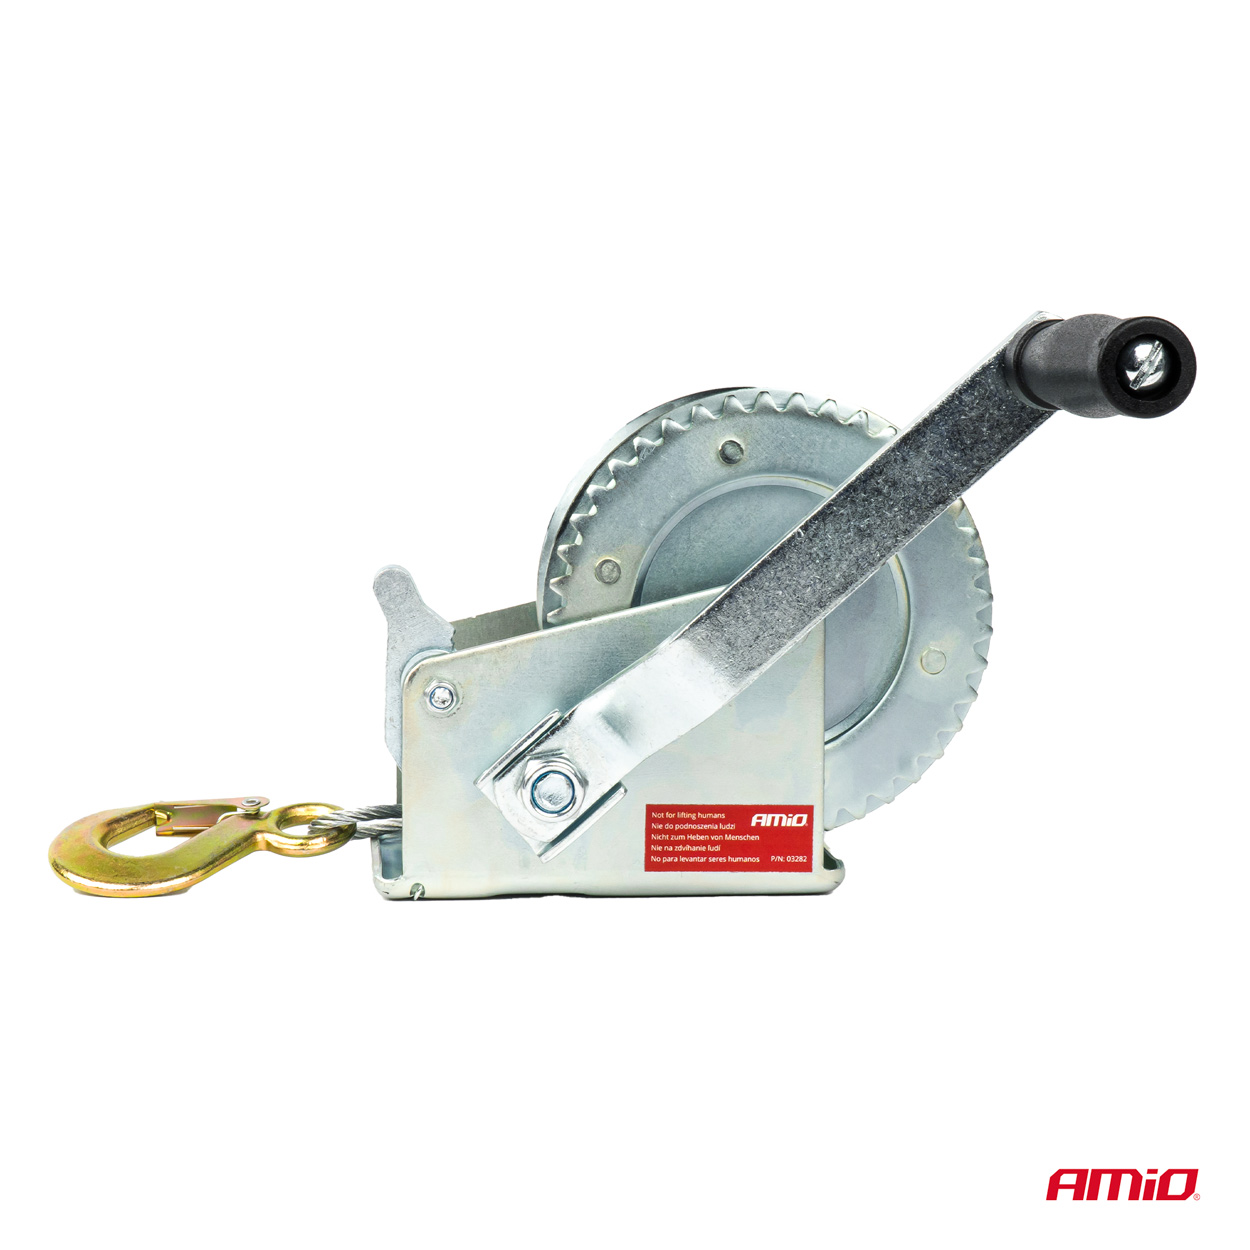 Amio Handwinch 450kg with 5m cable thumb